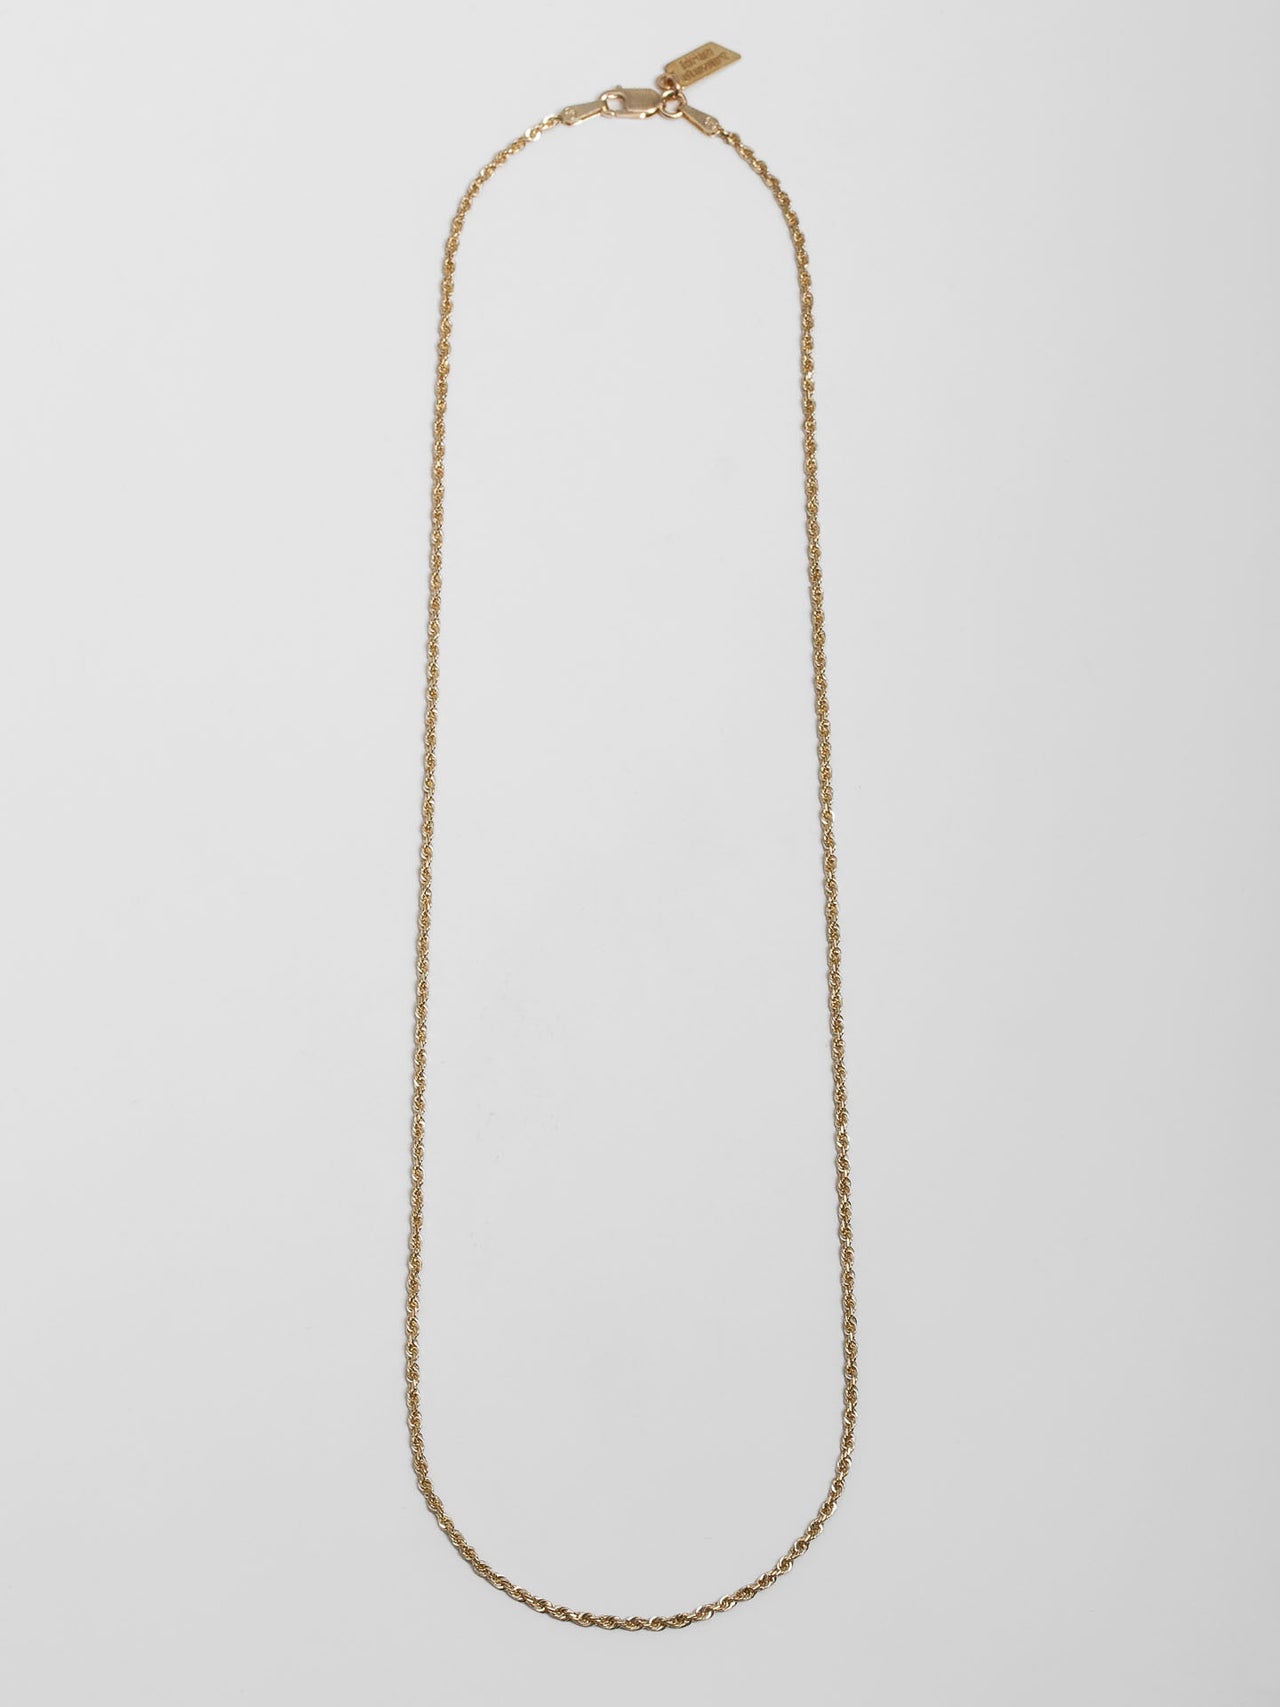 Solid 14kt Yellow Gold Lightweight Rope Chain pictured on light grey background.